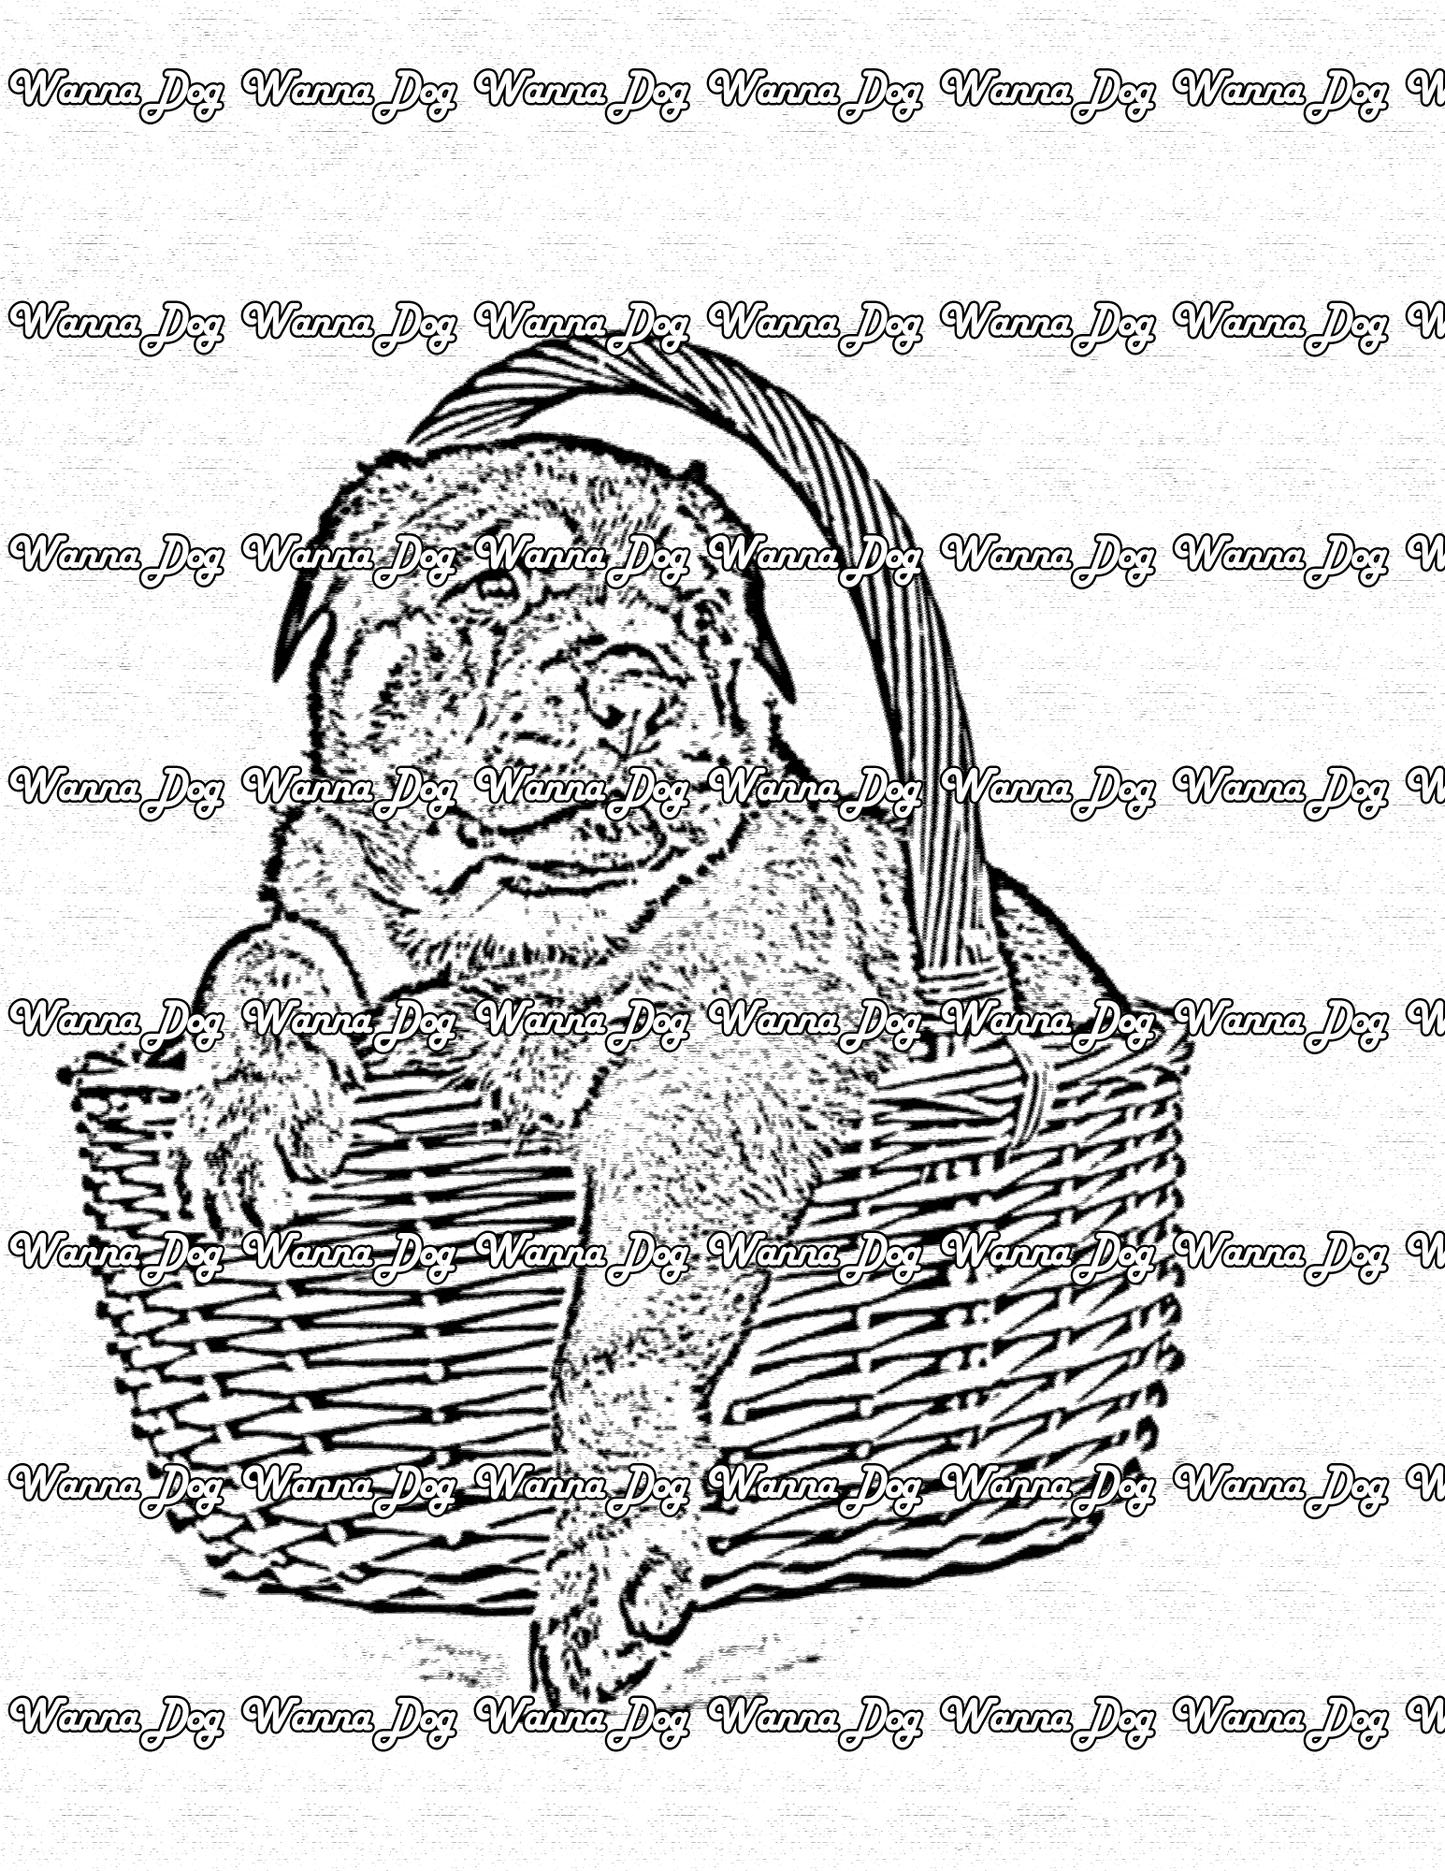 Rottweiler Coloring Page of a Rottweiler sitting in a basket